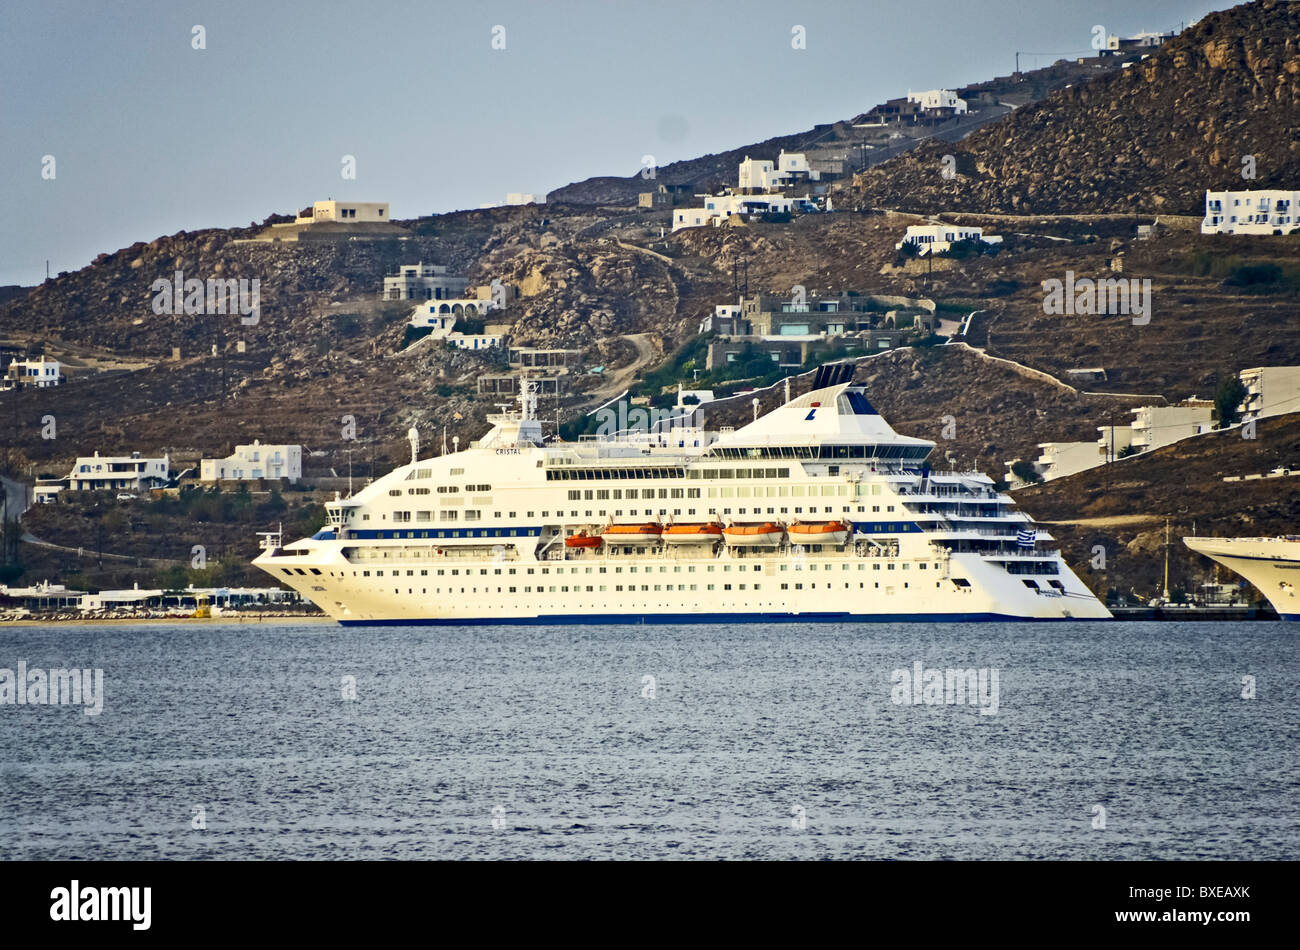 Louis Cruises cruise ship Cristal moored at Mykonos Cyclades Islands in Greece Stock Photo